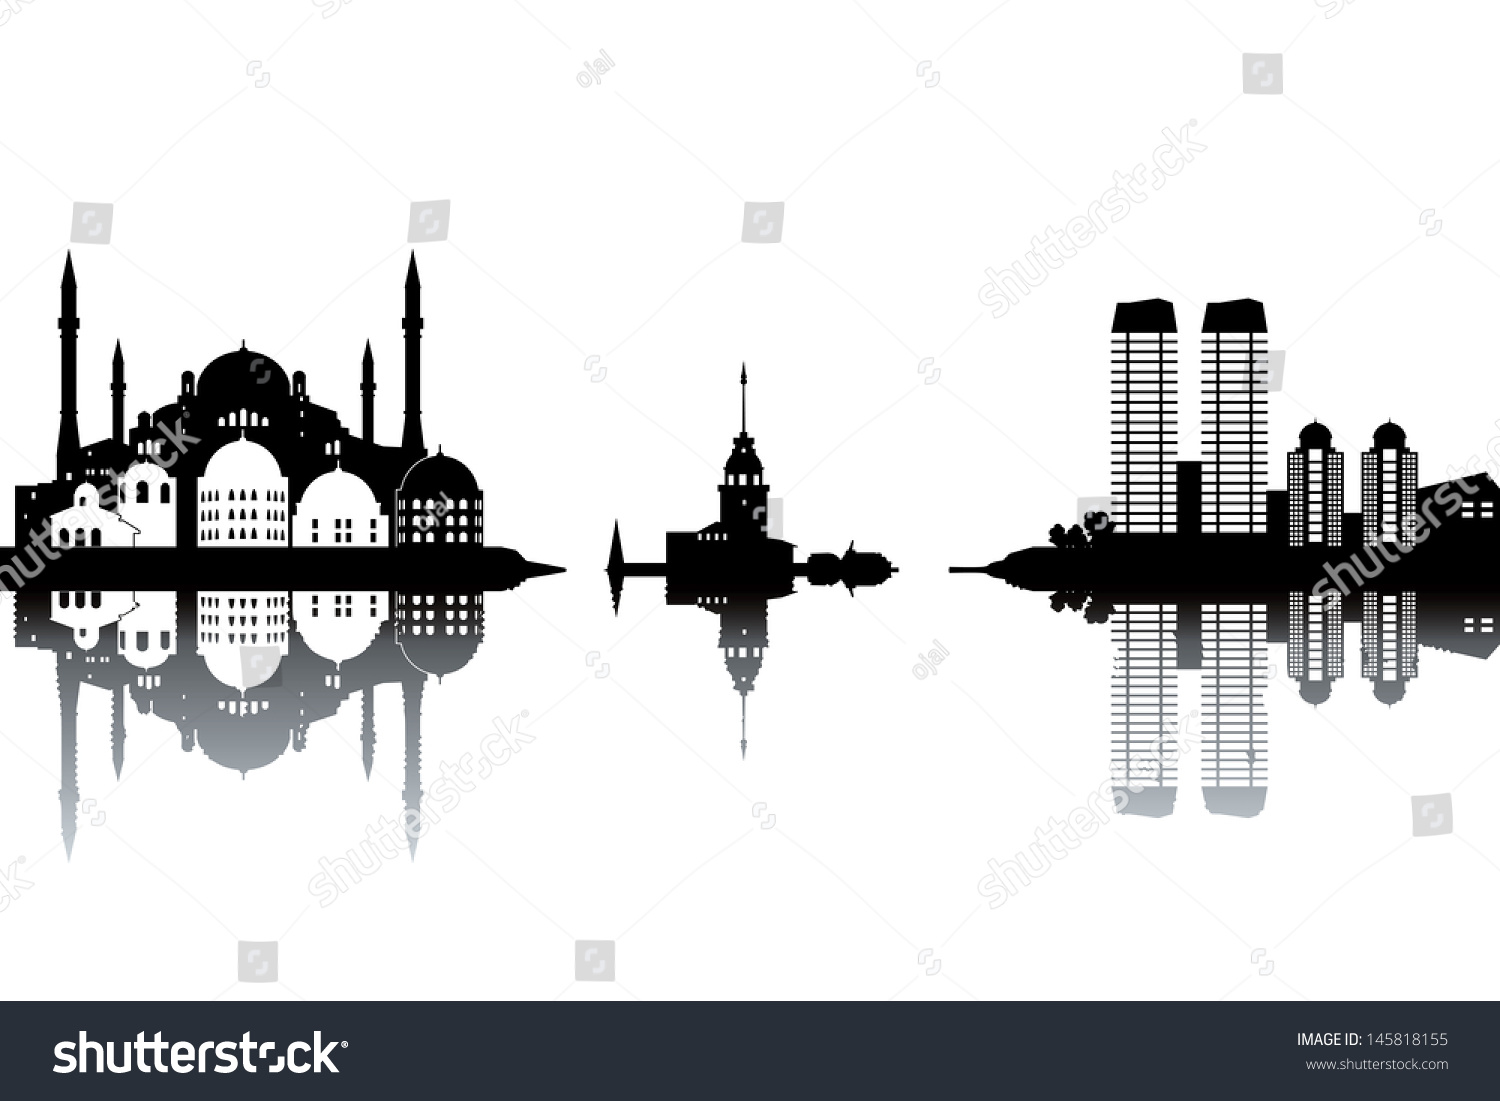 clipart istanbul - photo #14